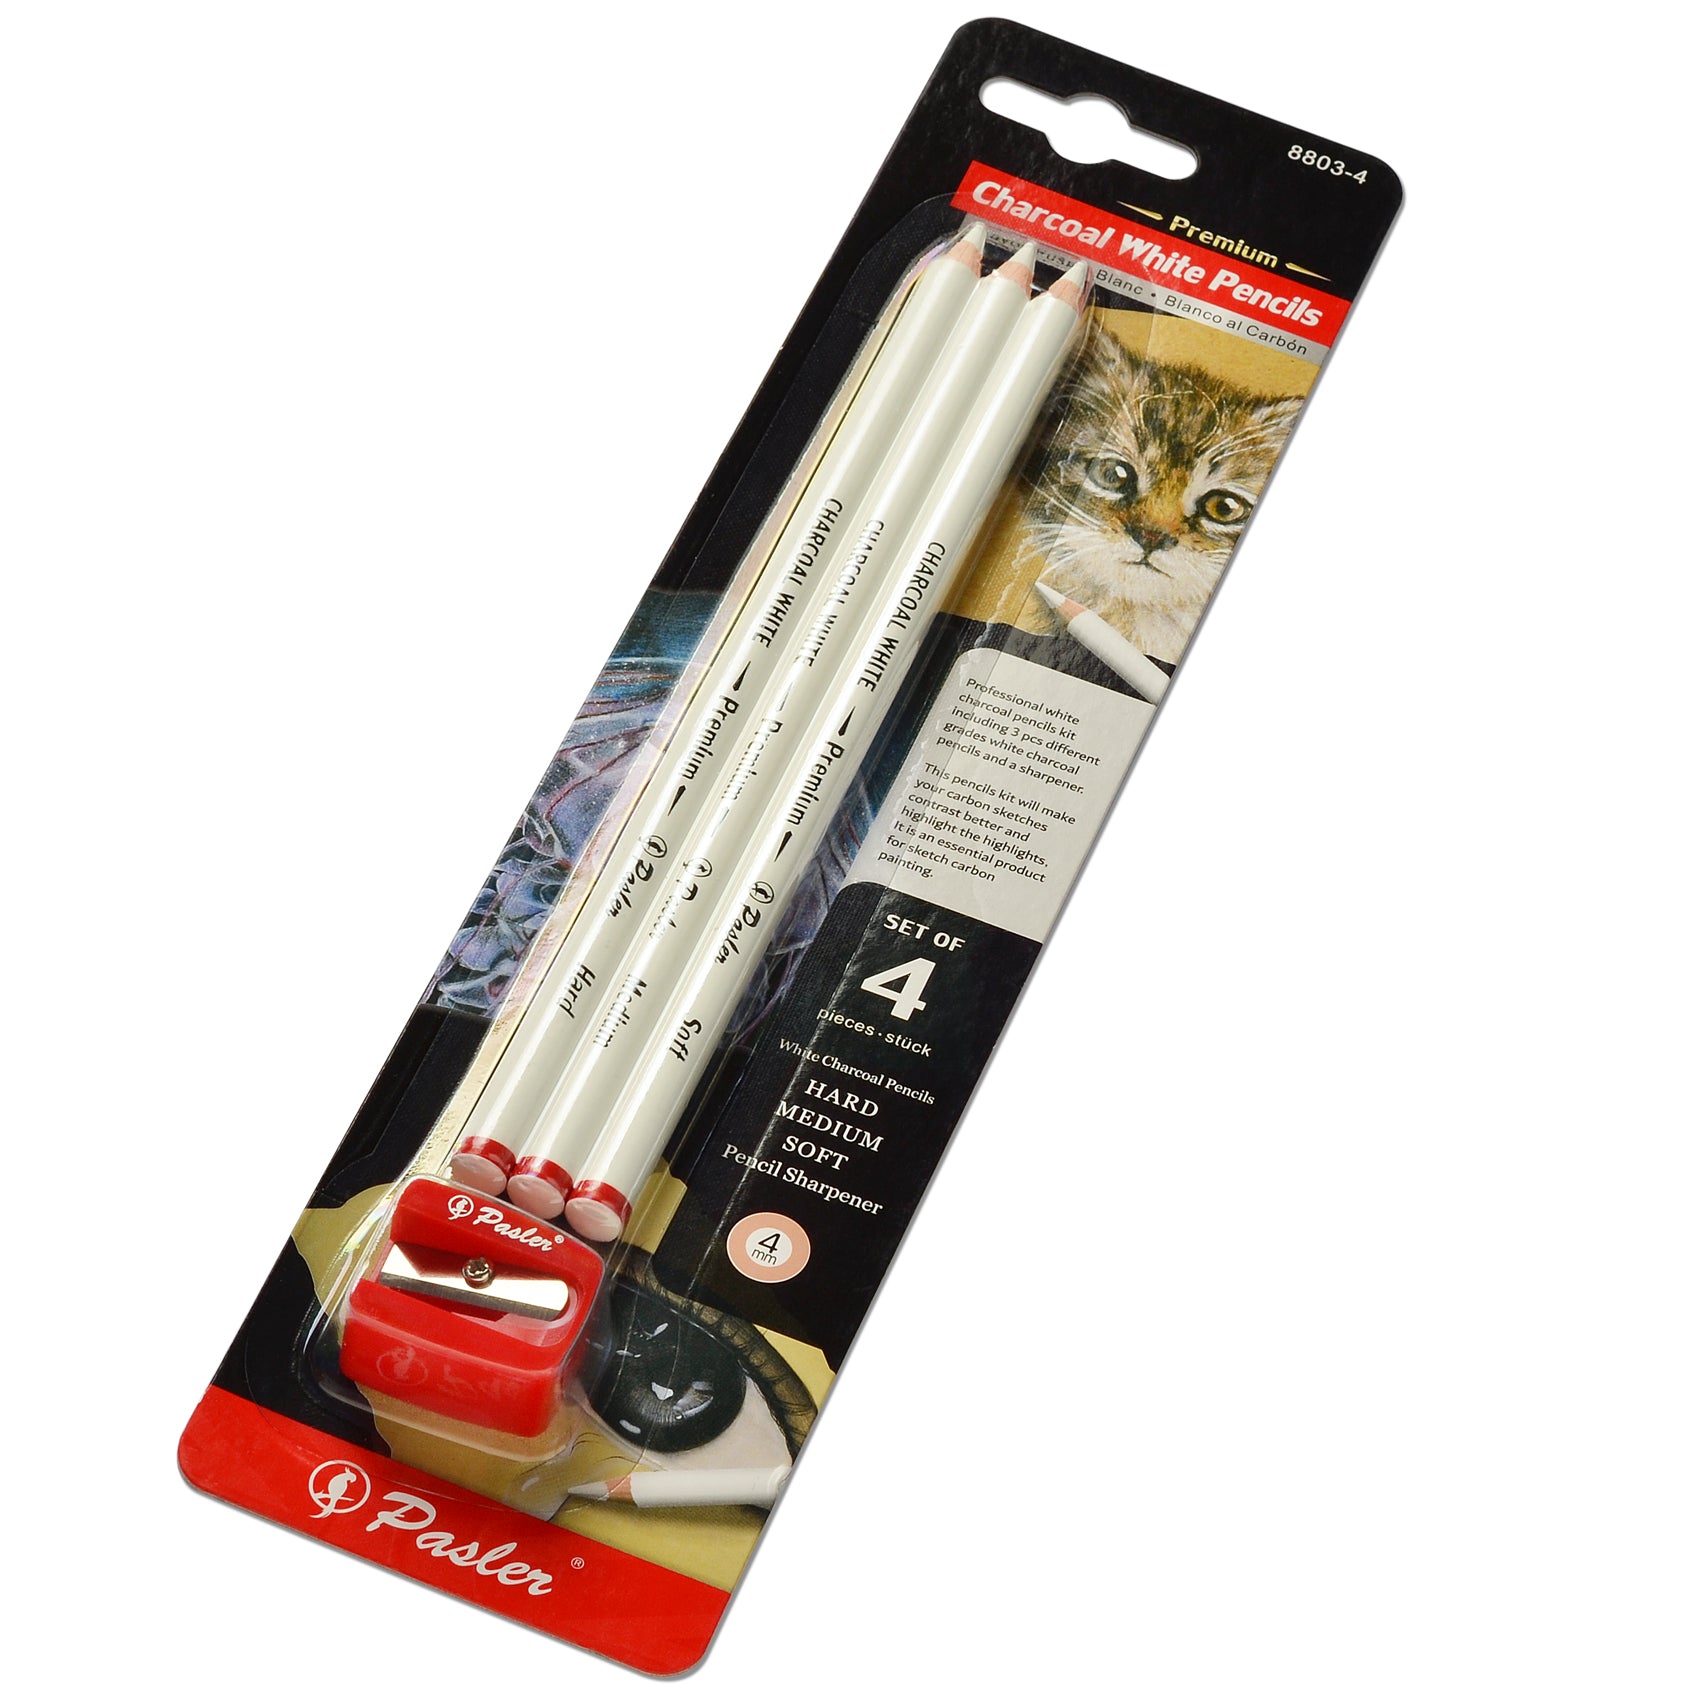 Pasler White Charcoal Pencils Set - 3 Pcs Sketch Highlight White Pencils for Drawing, Sketching, Shading, Blending